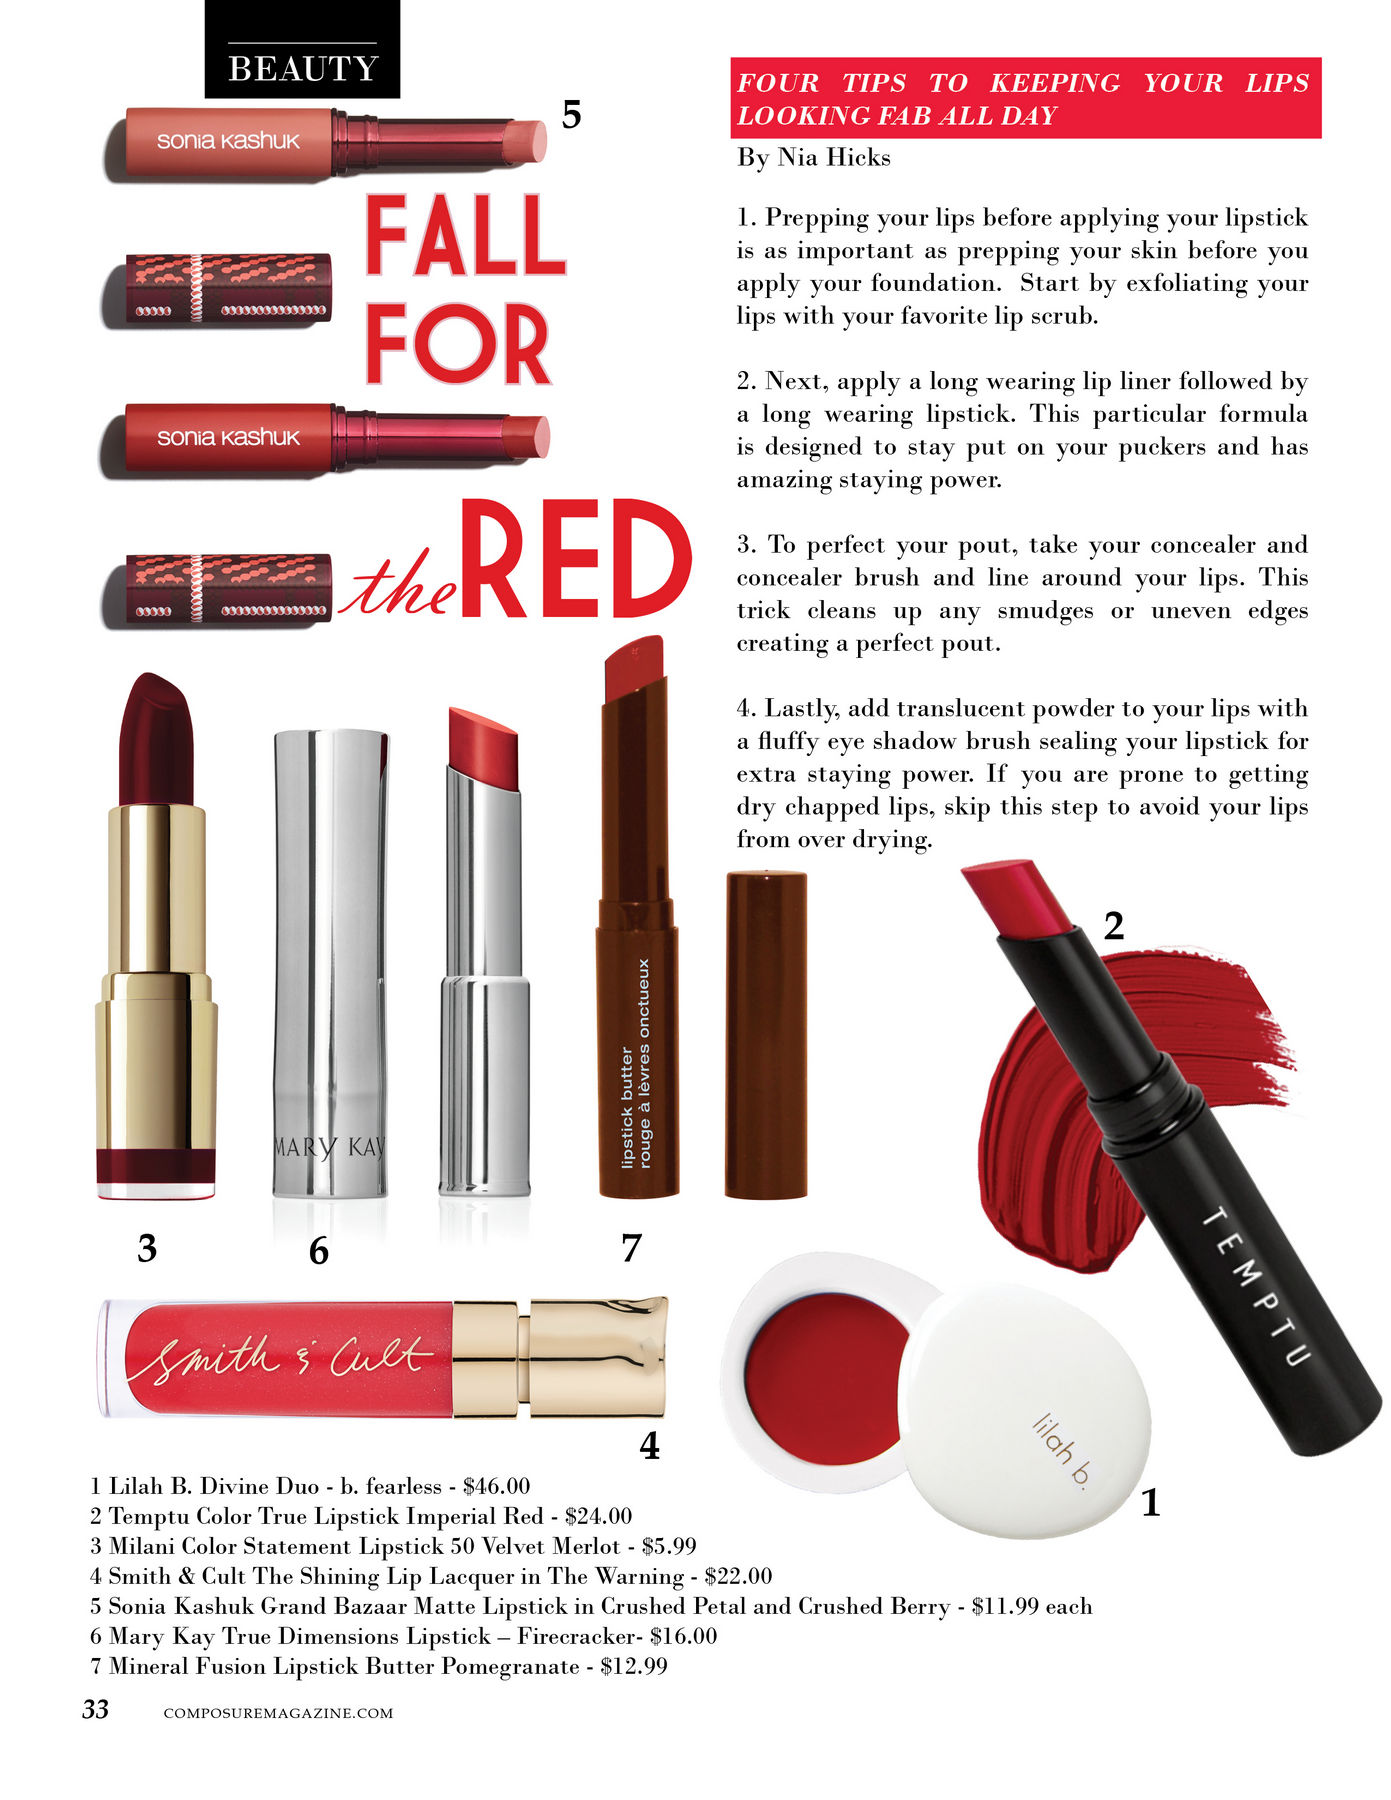 Beauty: Fall For the Red